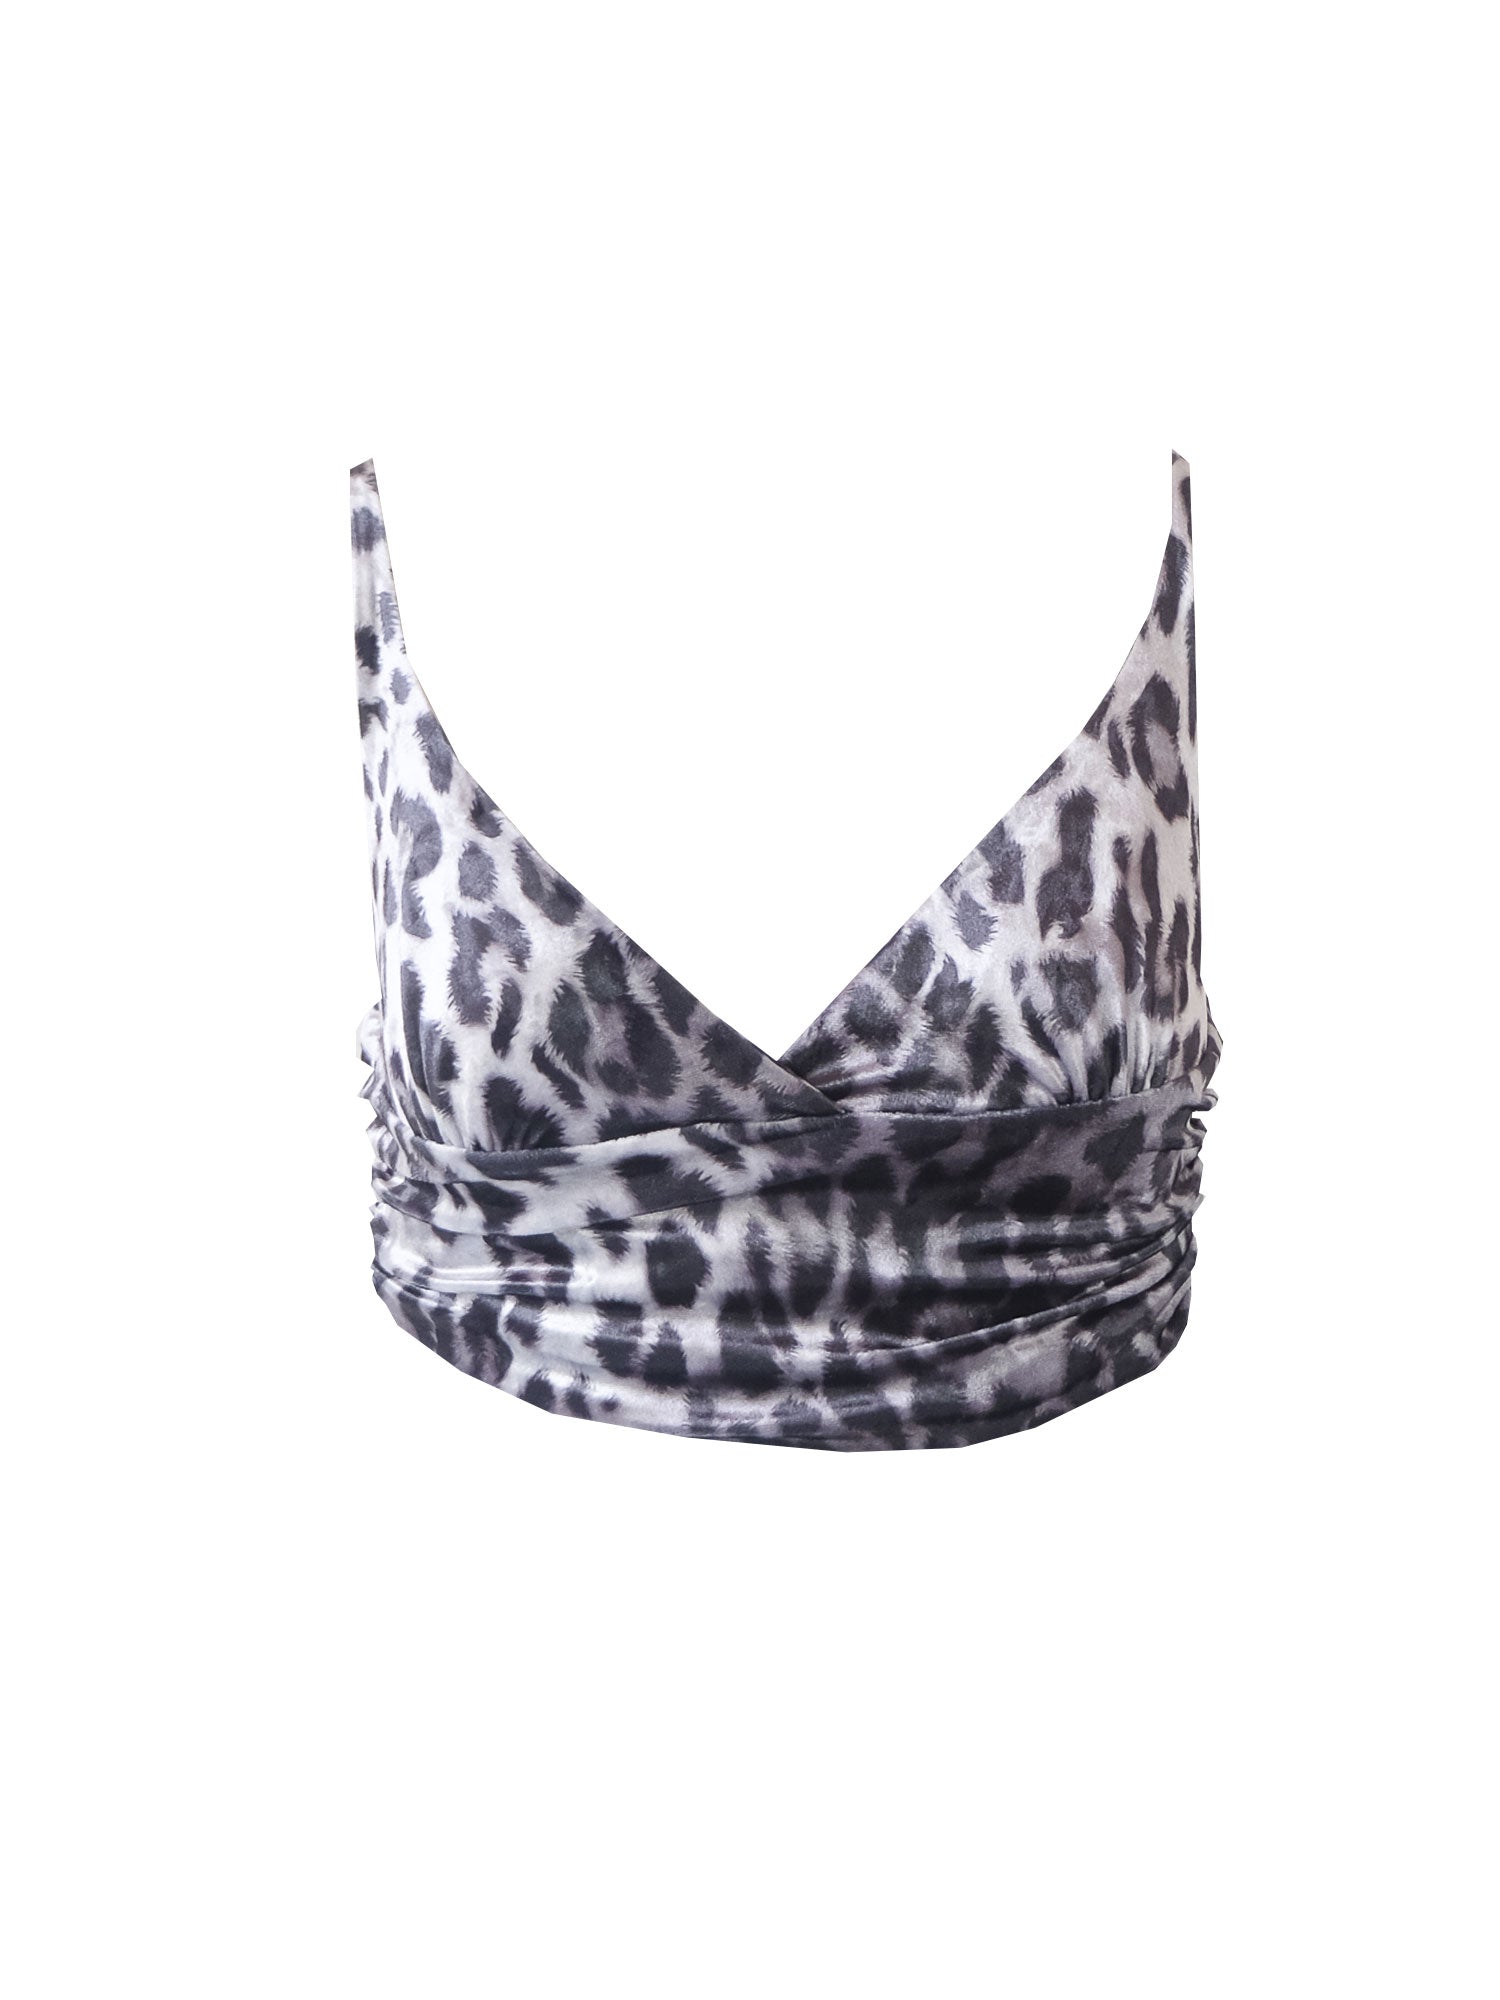 ARIEL - grey animalier print top in hammered chenille